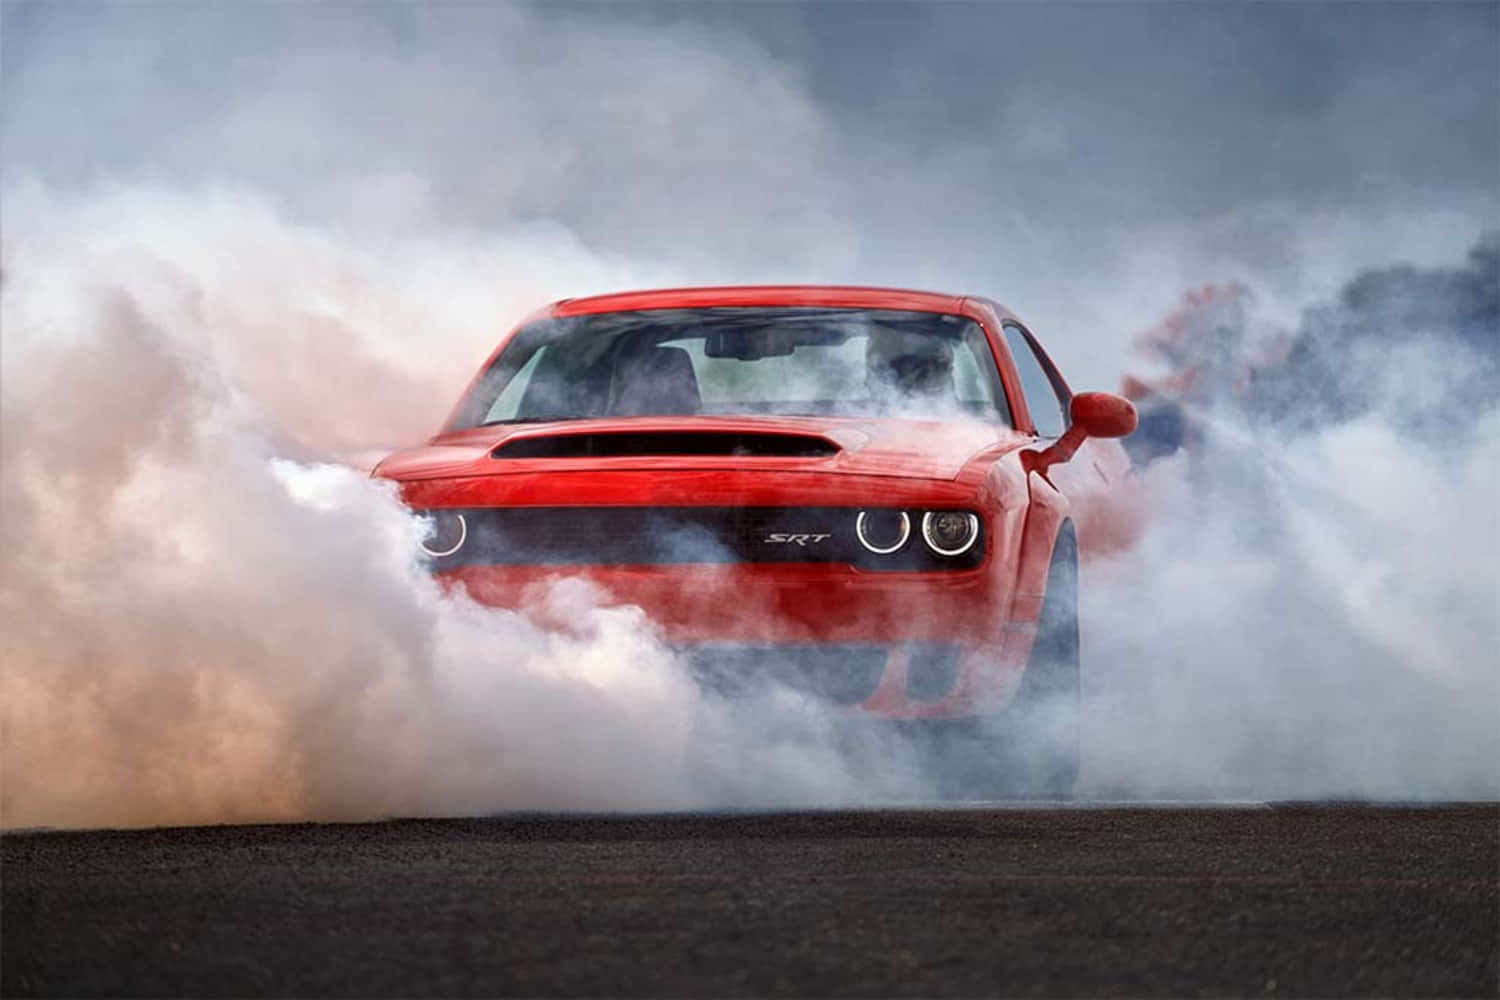 Powerful and Bold - The Dodge Challenger